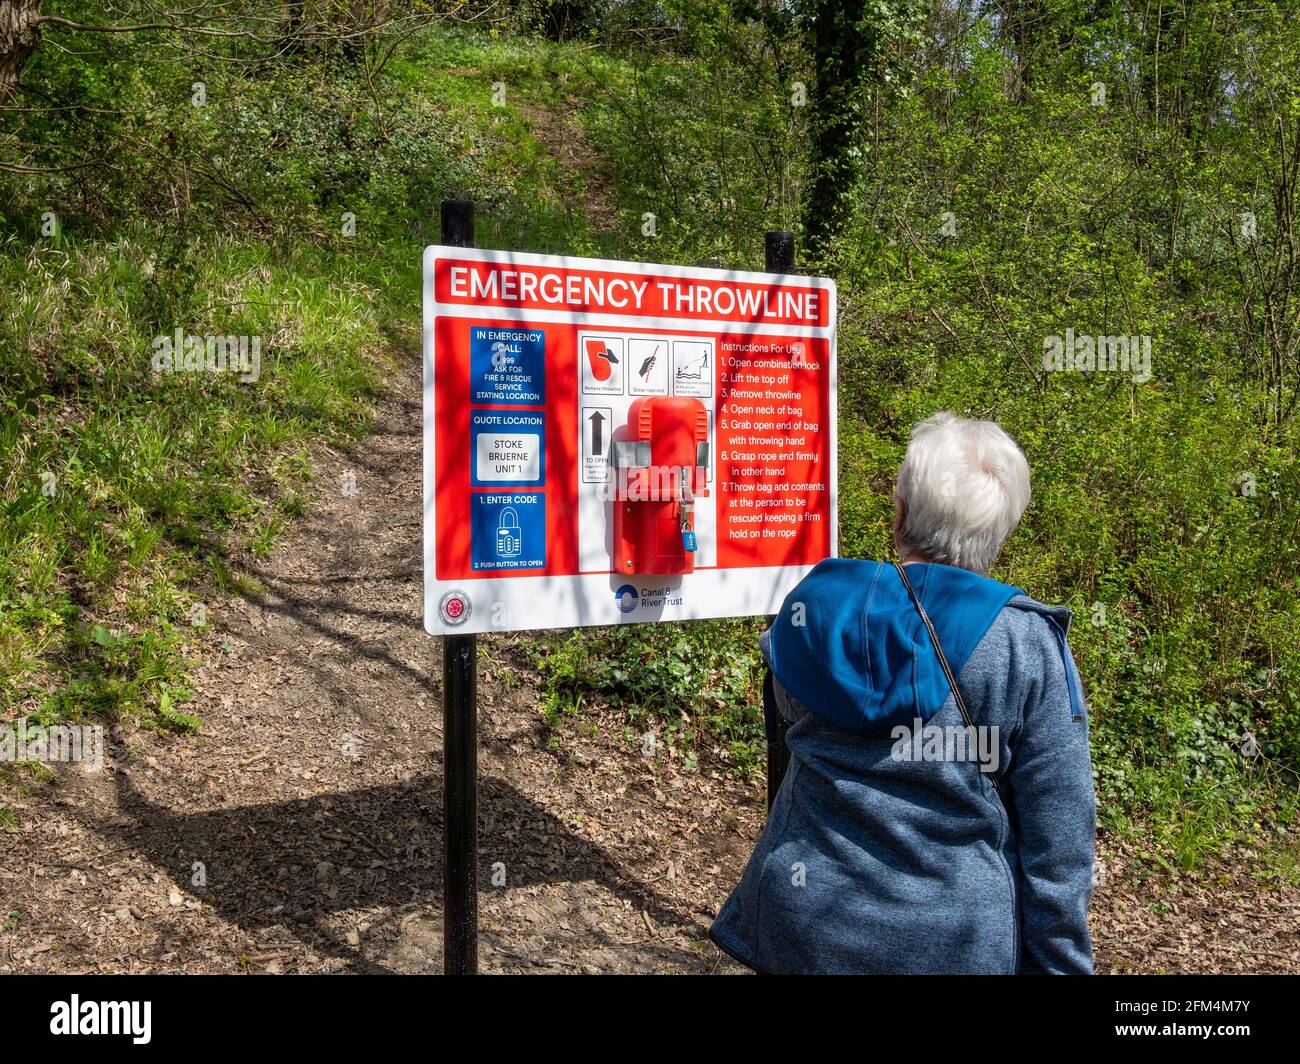 Emergency Throwline and instruction board, Grand Union canal, Stoke Bruerne, Northamptonshire, UK; woman reading board. Stock Photo